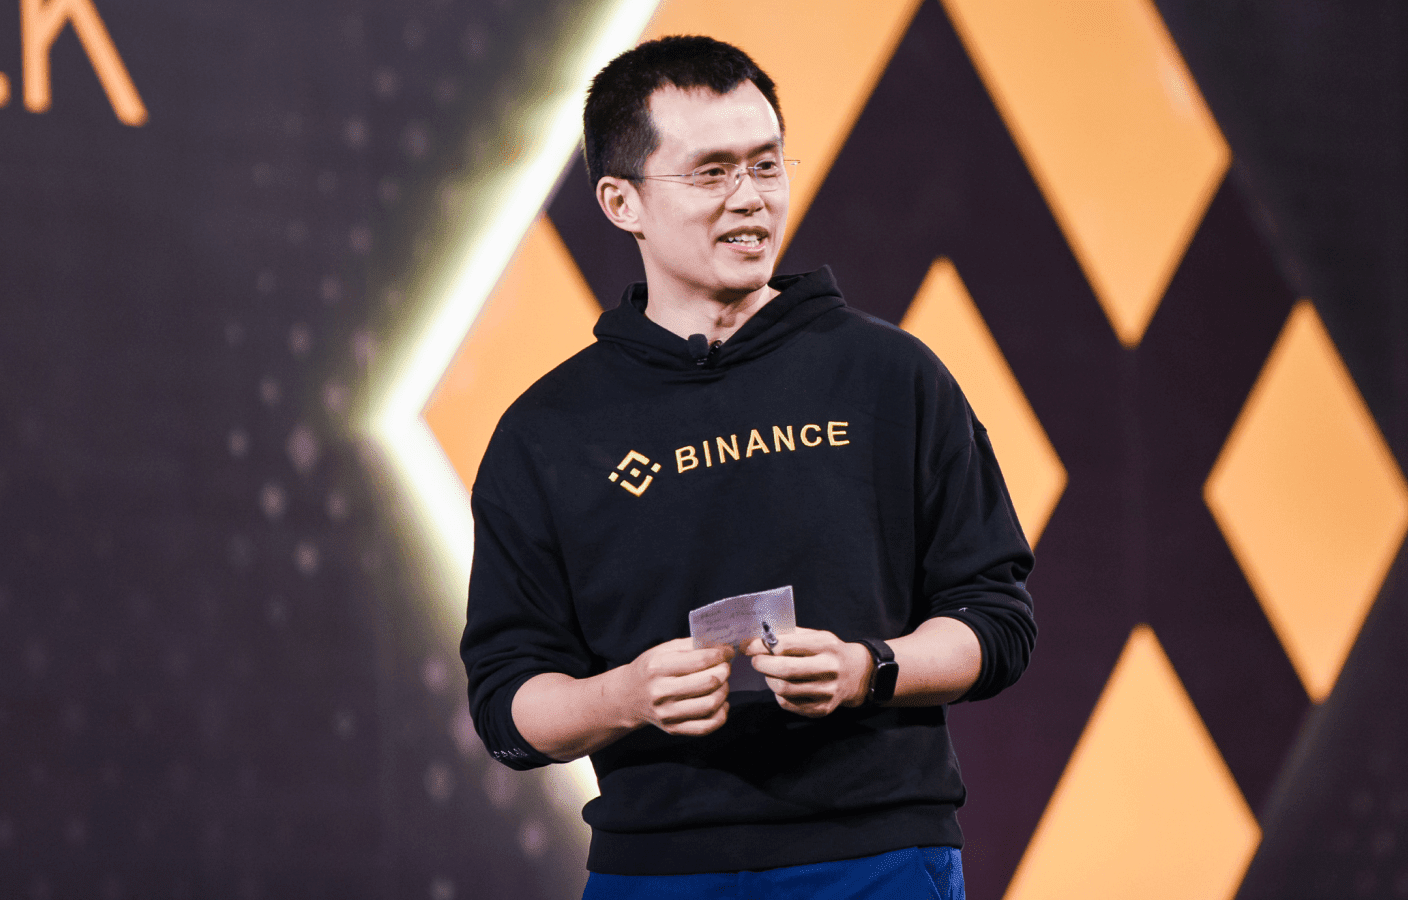 Binance Employees Reportedly Help Chinese Customers Bypass KYC Verification